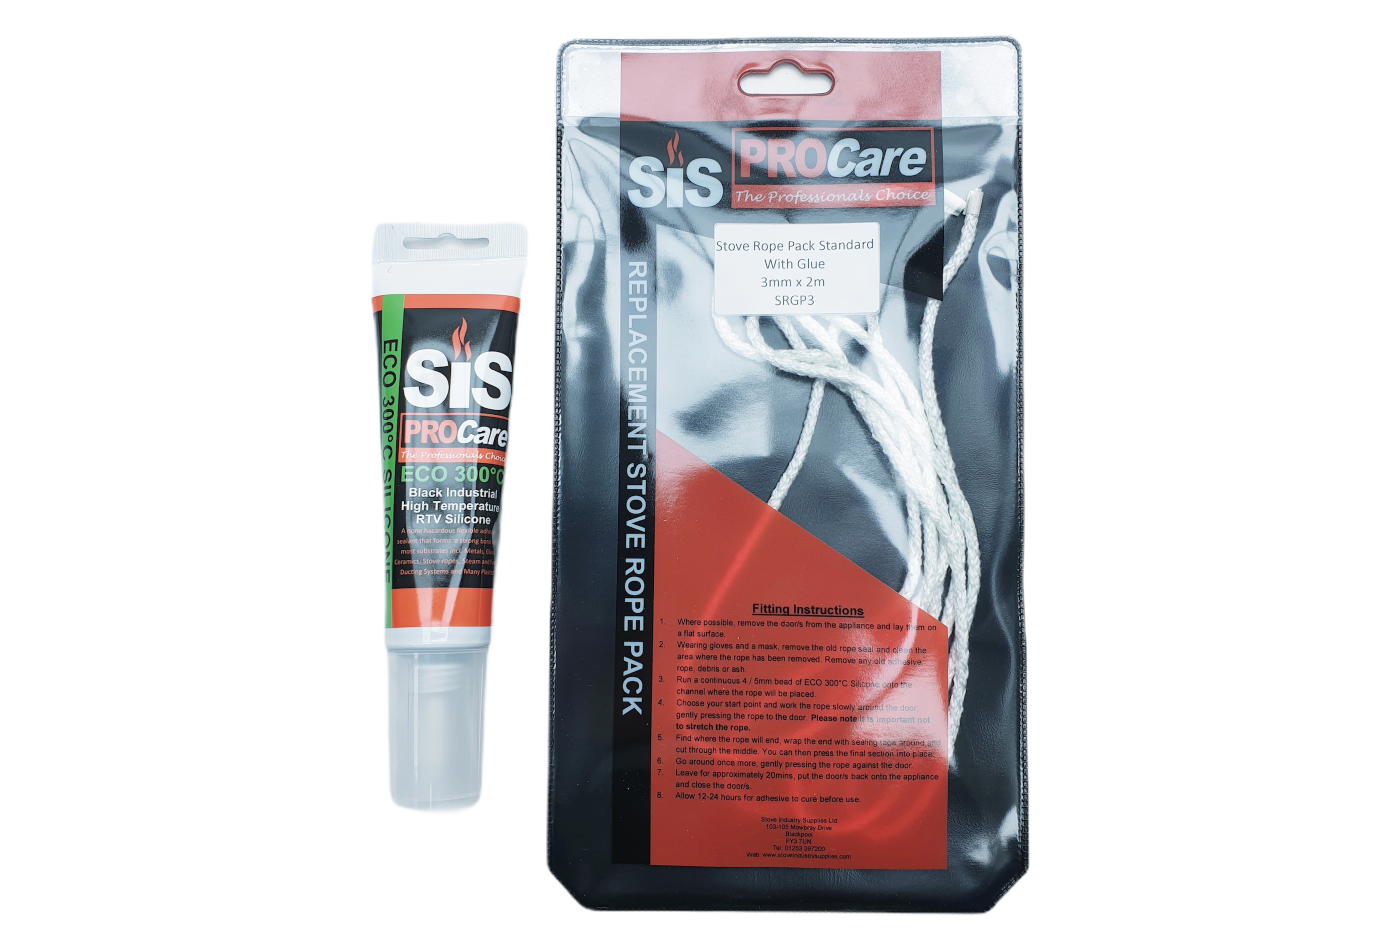 SiS Procare White 3 milimetre x 2 metre Standard Stove Rope & 80 millilitre Rope Glue Pack - product code SRGP3